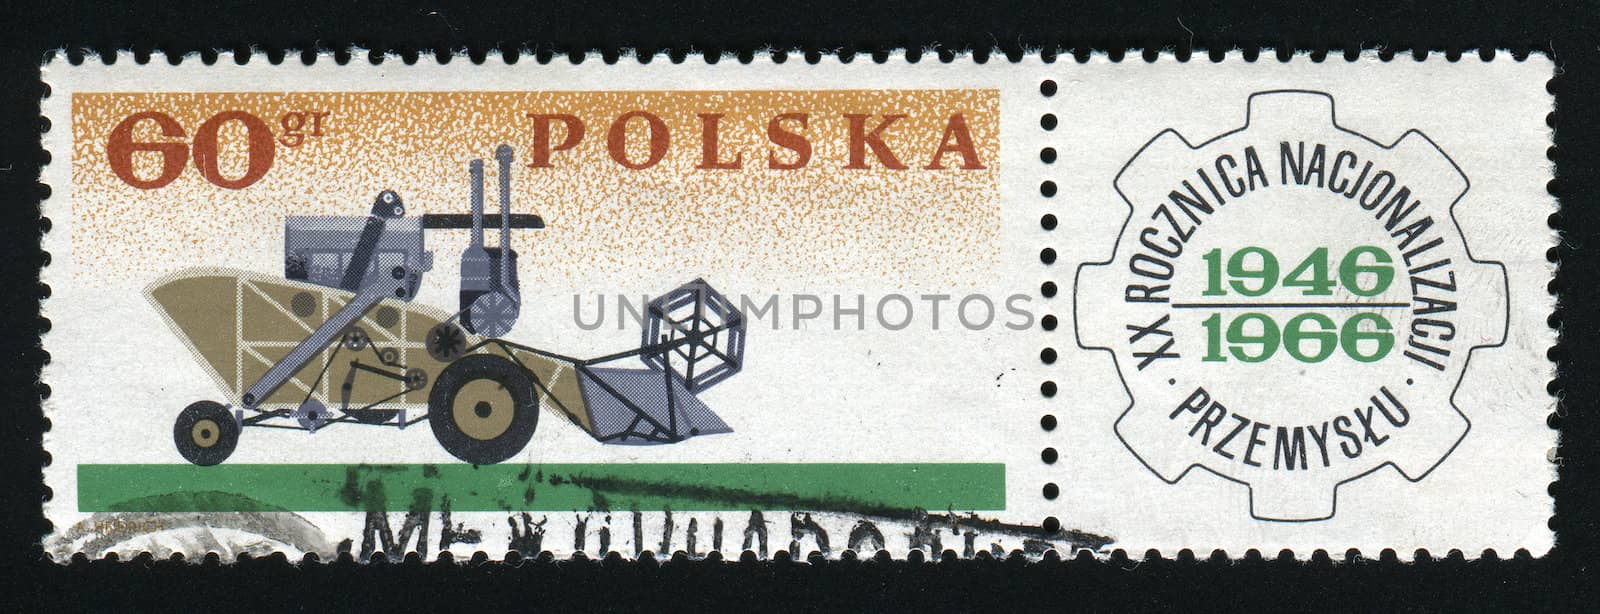 postmark by rook